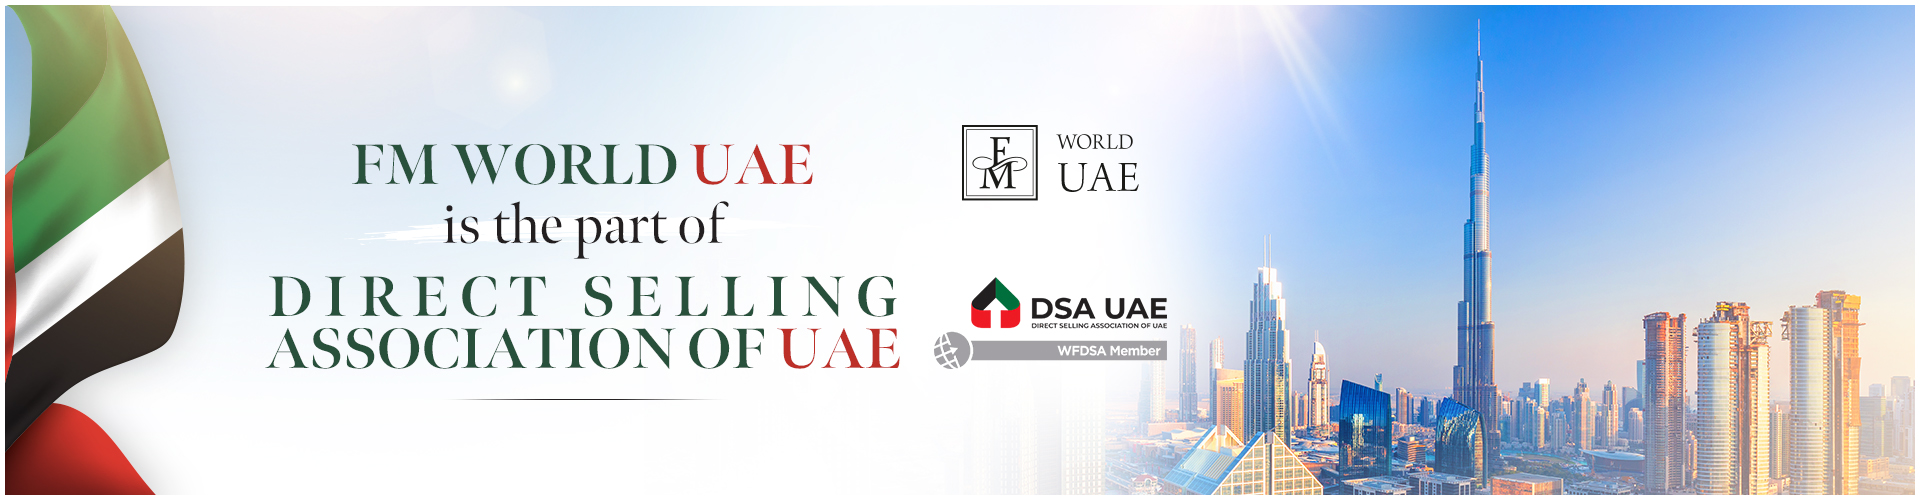 FM WORLD UAE is the part of Direct Selling Association!